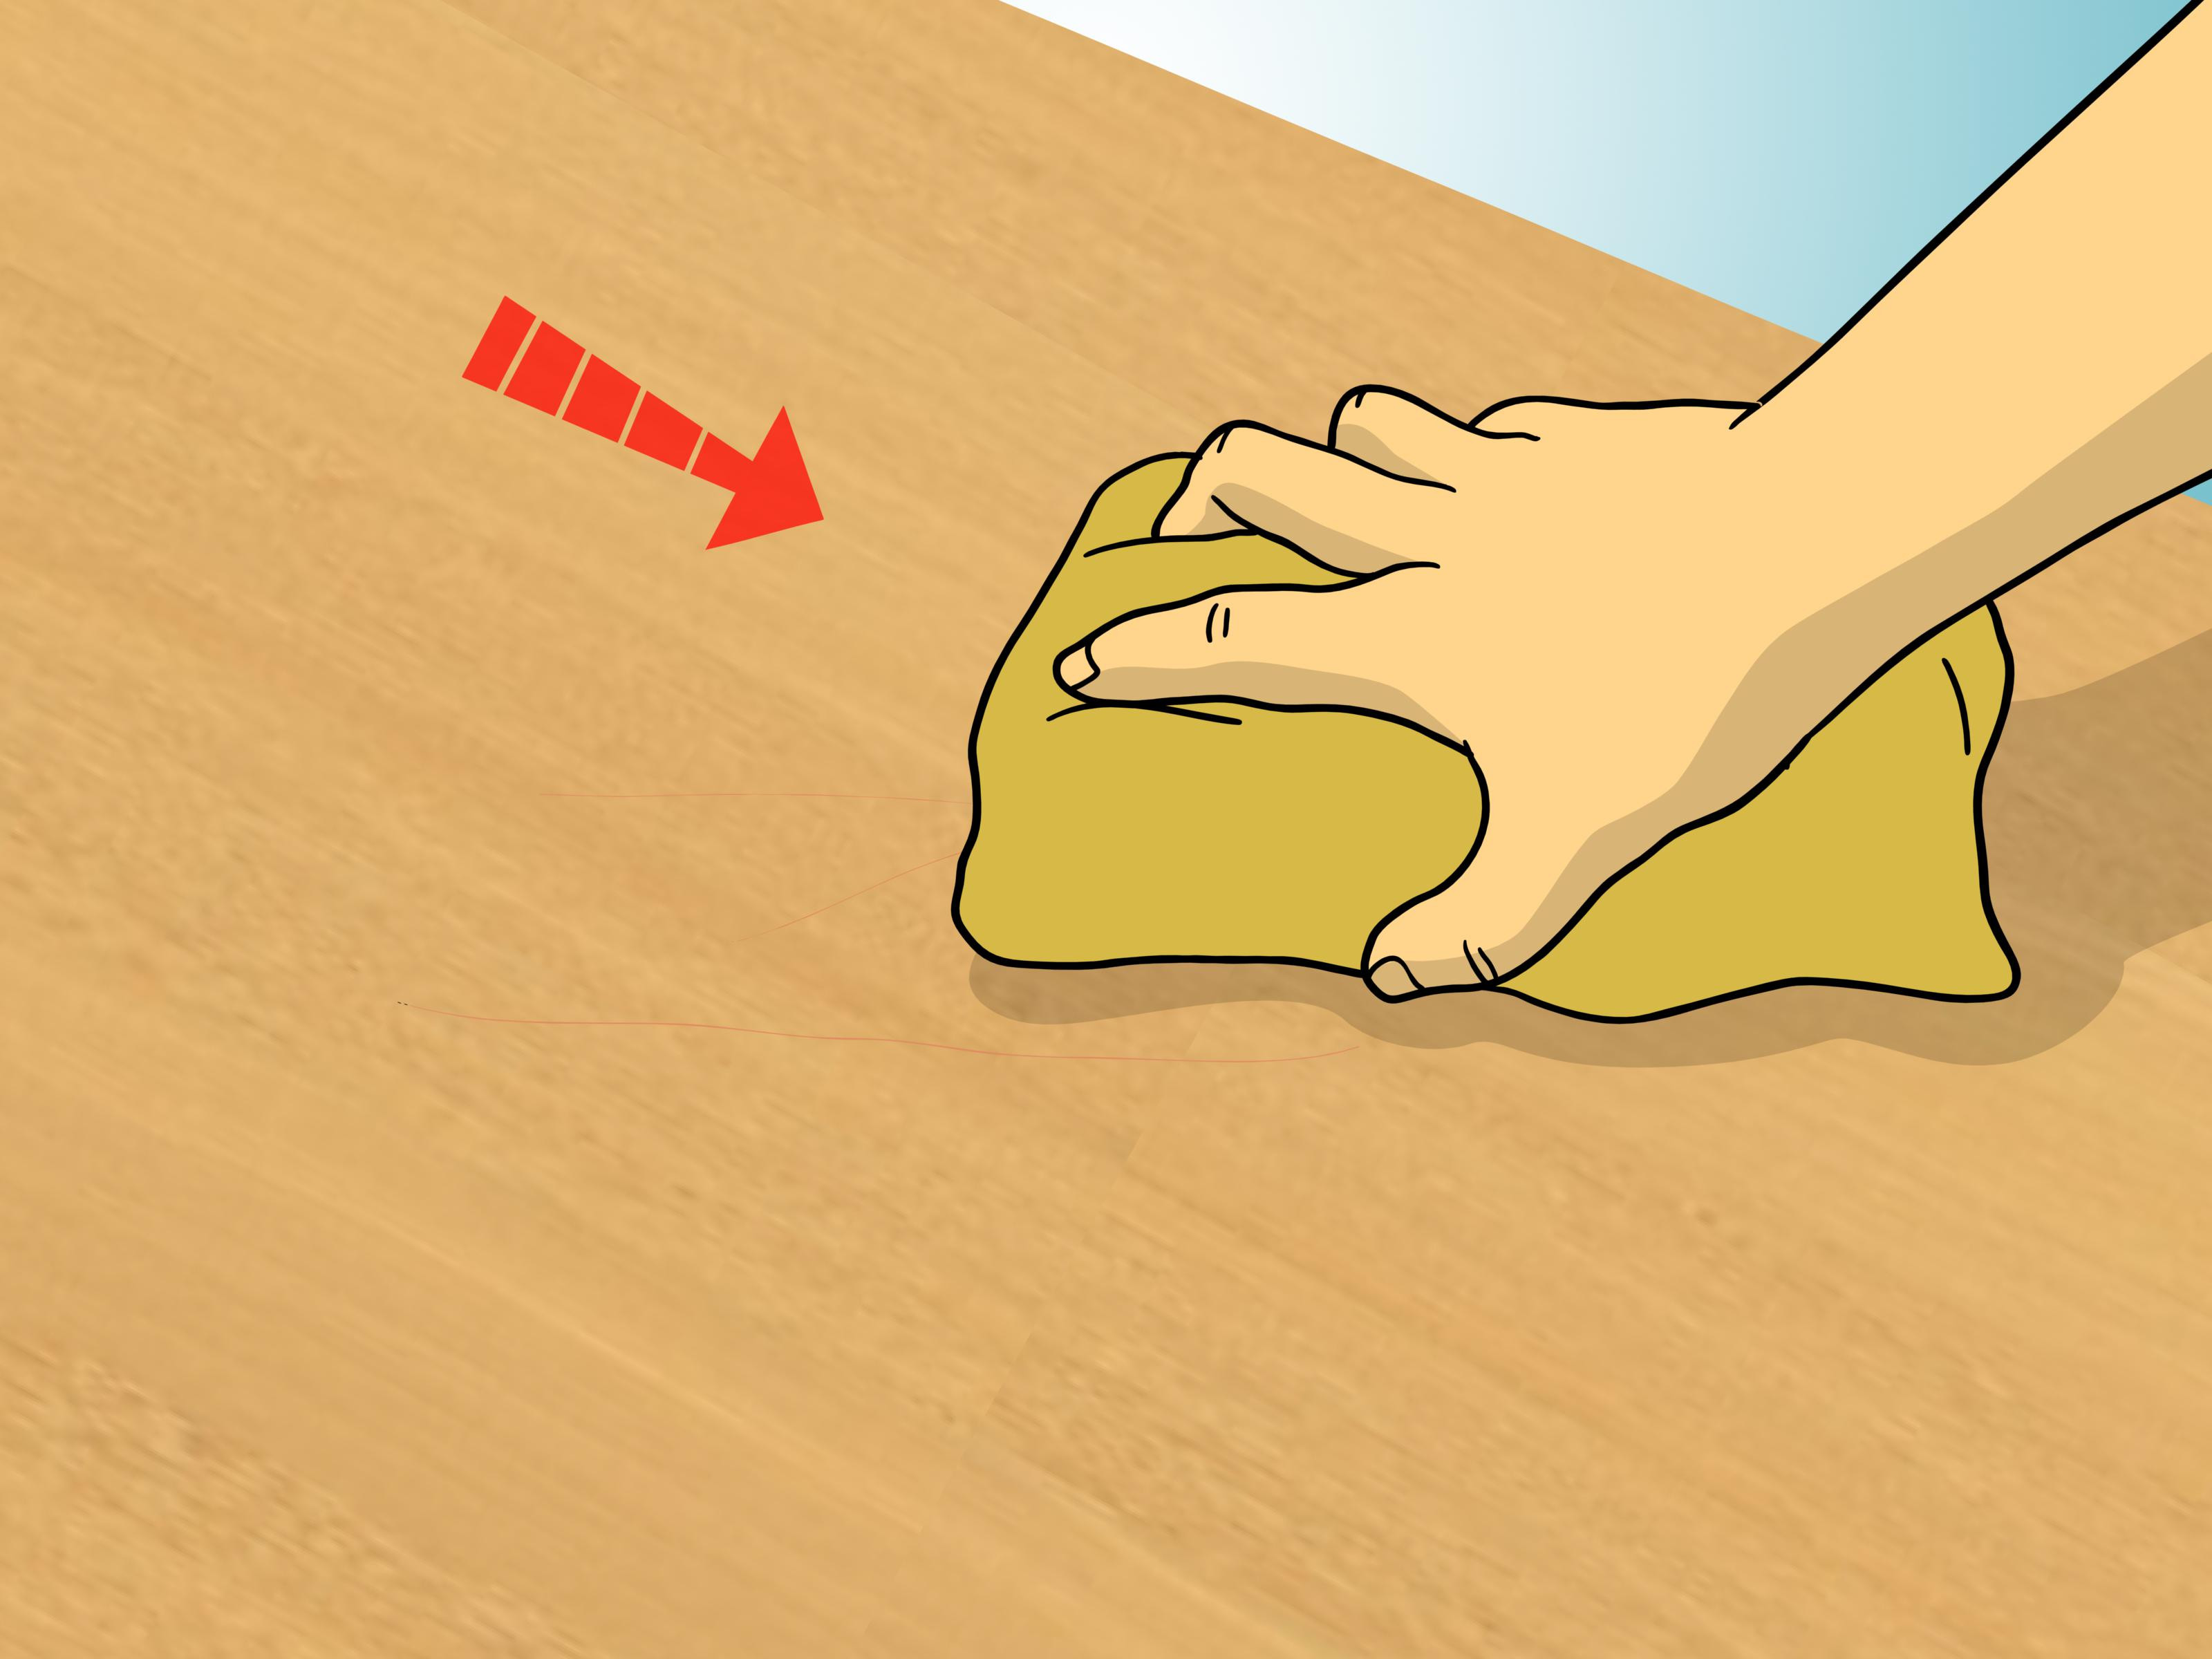 16 Spectacular How to Fix Gouges In Hardwood Floors 2024 free download how to fix gouges in hardwood floors of 5 ways to touch up scratches on furniture wikihow with regard to touch up scratches on furniture step 15 version 2